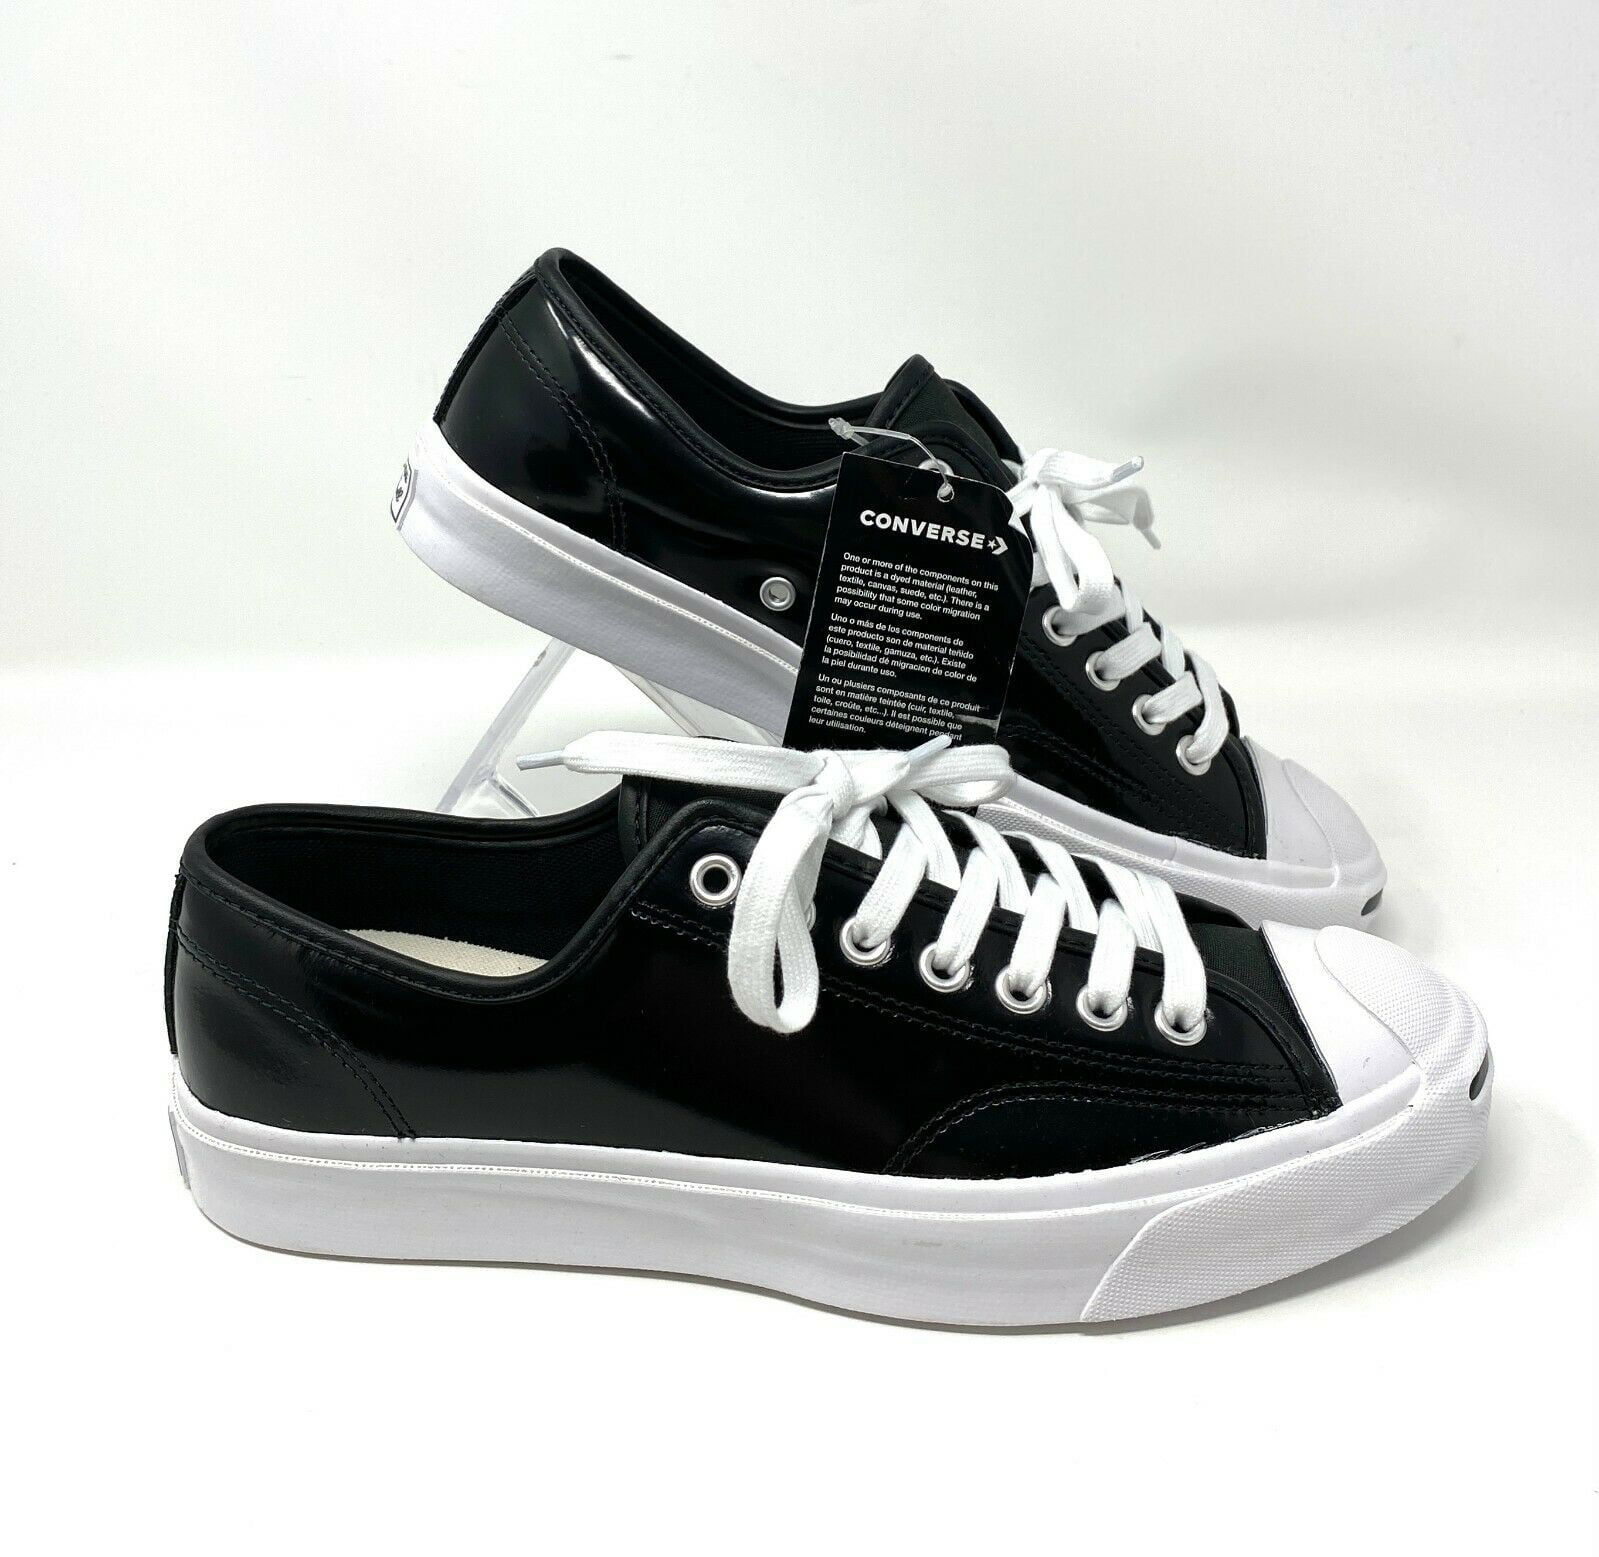 Converse Jack Purcell Women's Black Leather Low Top Sneakers Smile - Walmart.com